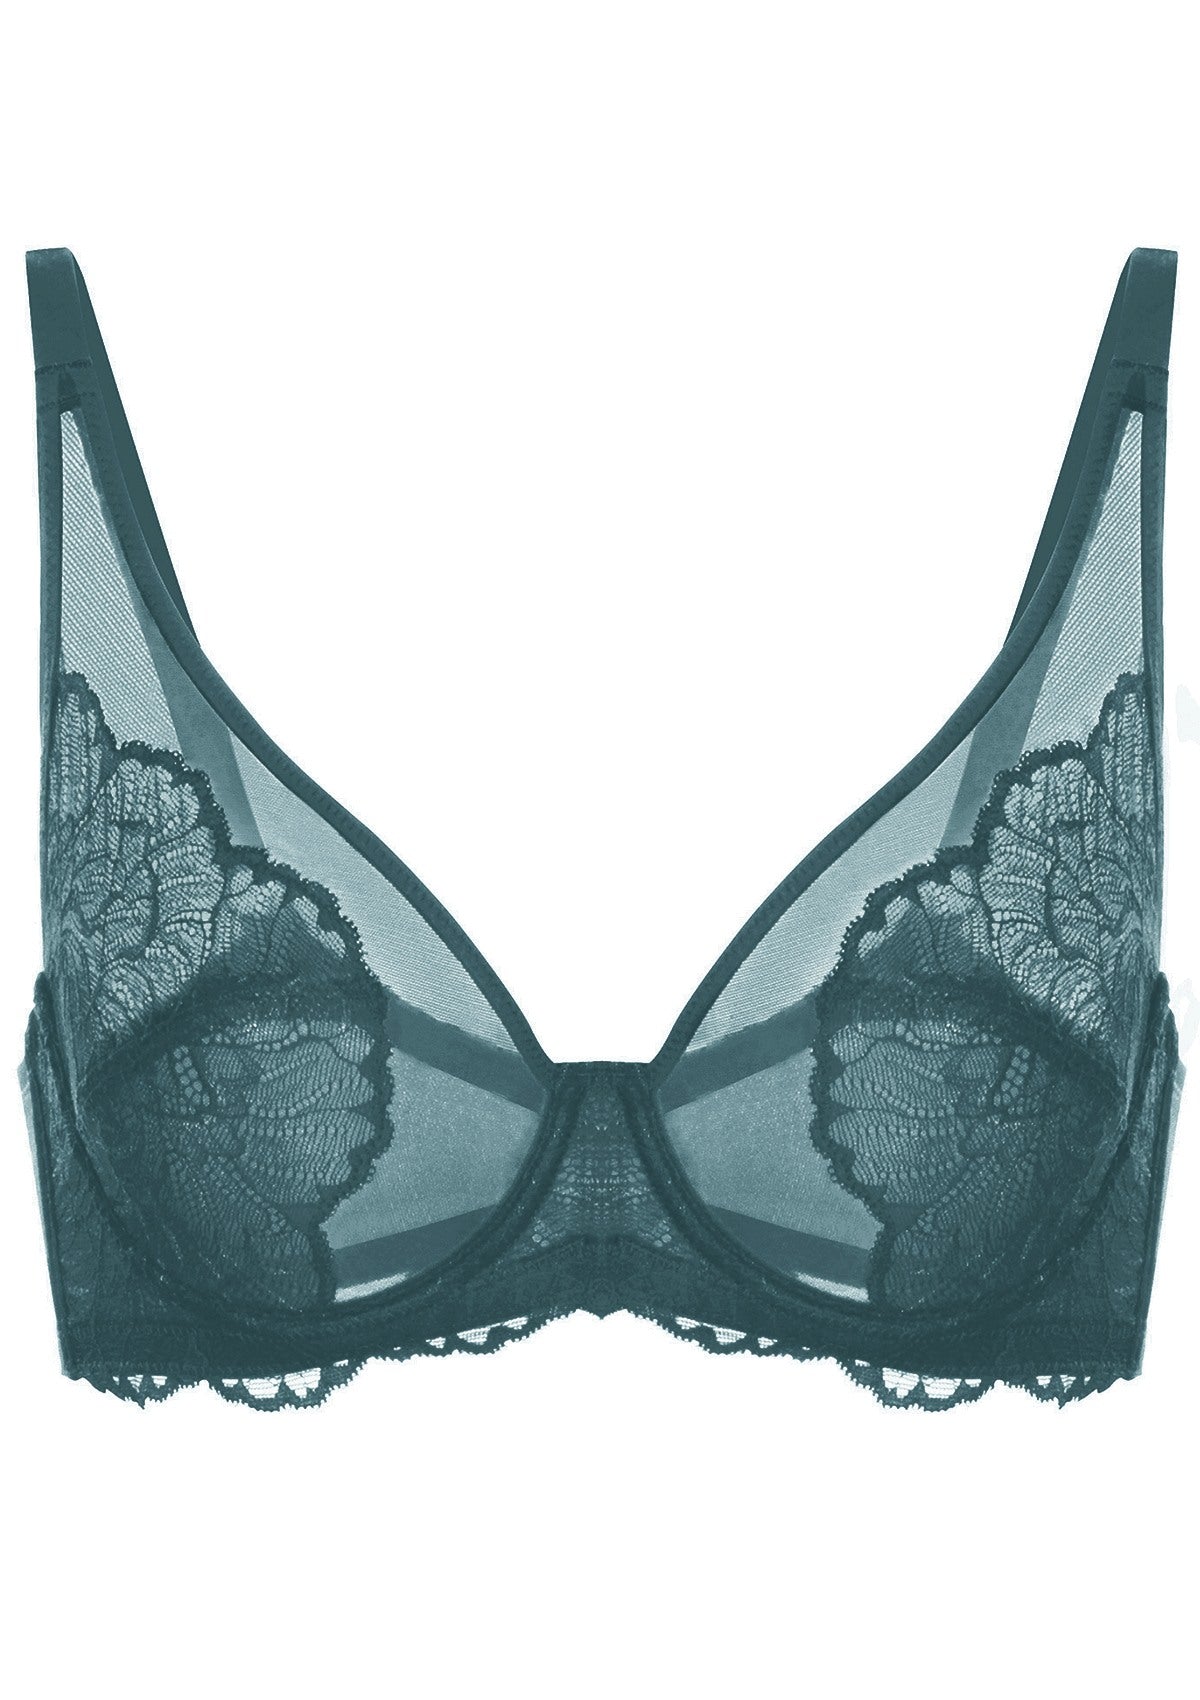 HSIA Blossom Full Figure See-Through Lace Bra For Side And Back Fat - Biscay Blue / 34 / D